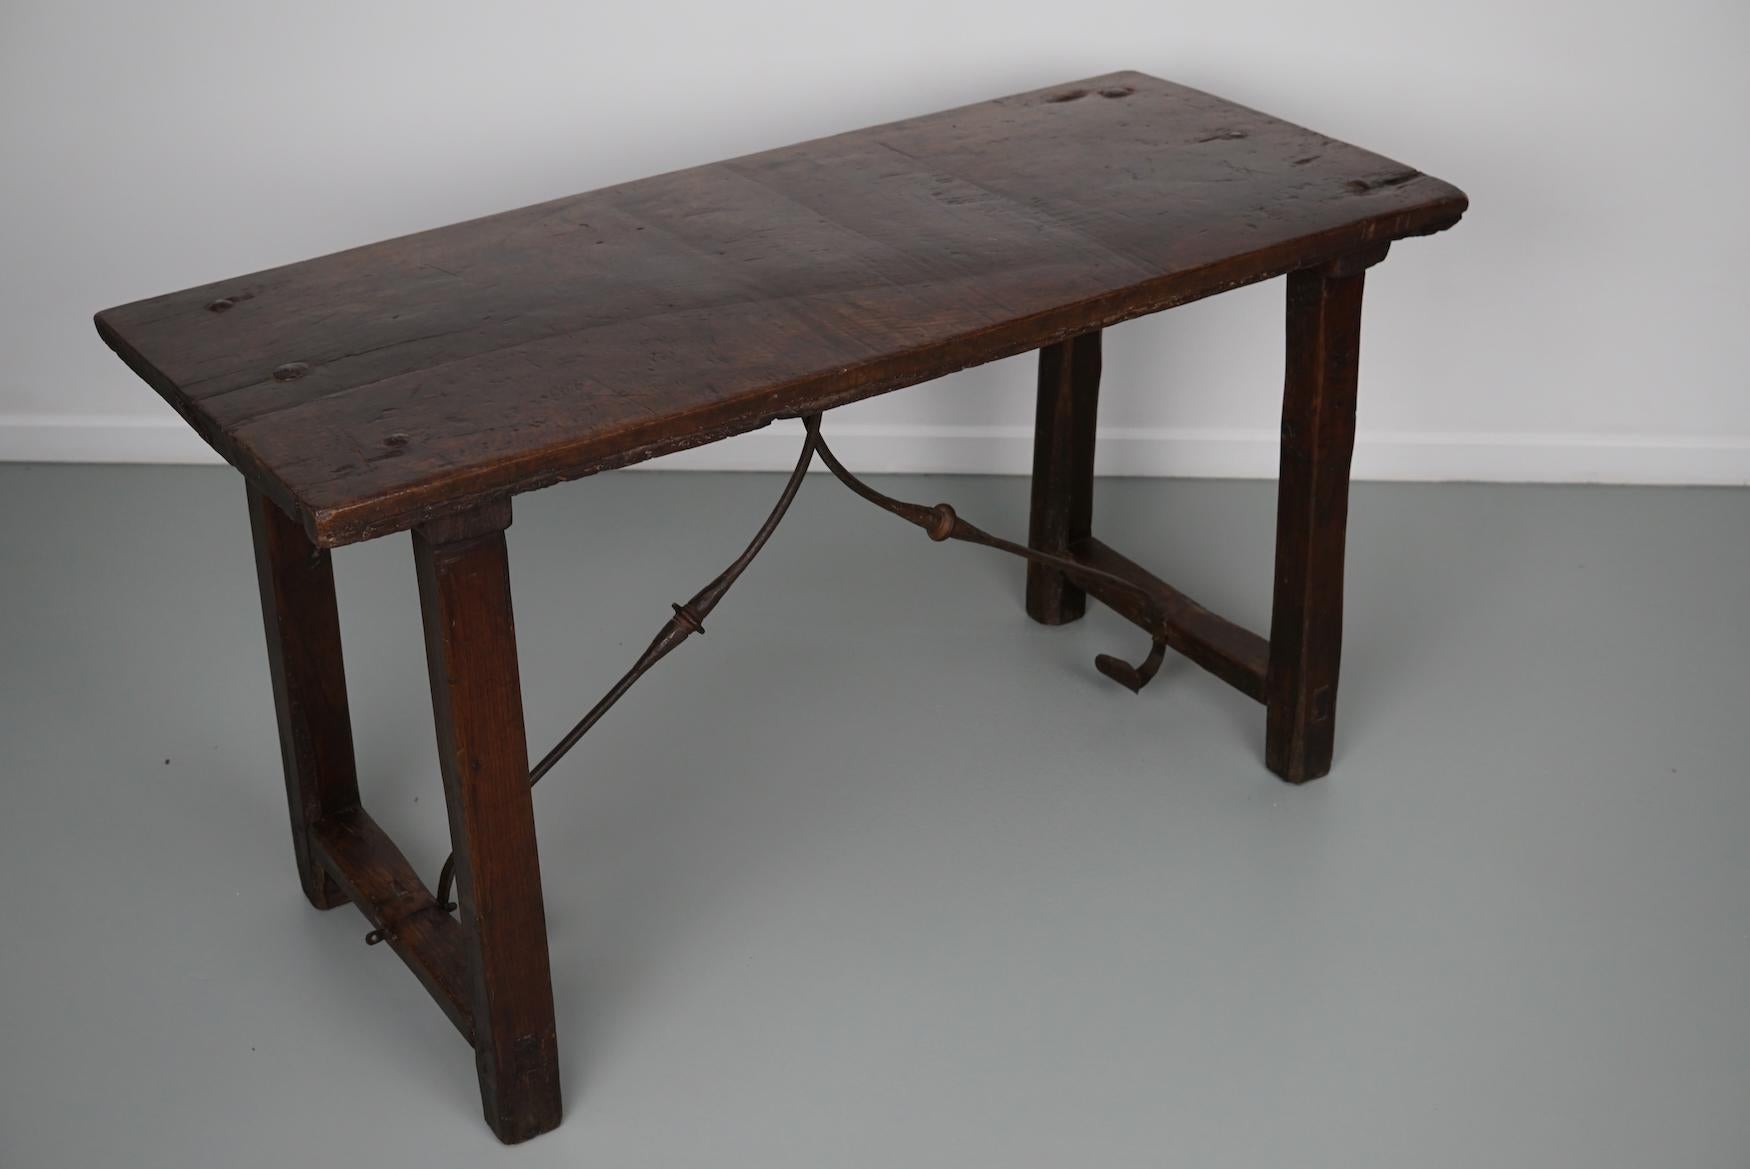 Antique Spanish Rustic Farmhouse Chestnut Side Table / Console, 18th Century For Sale 2